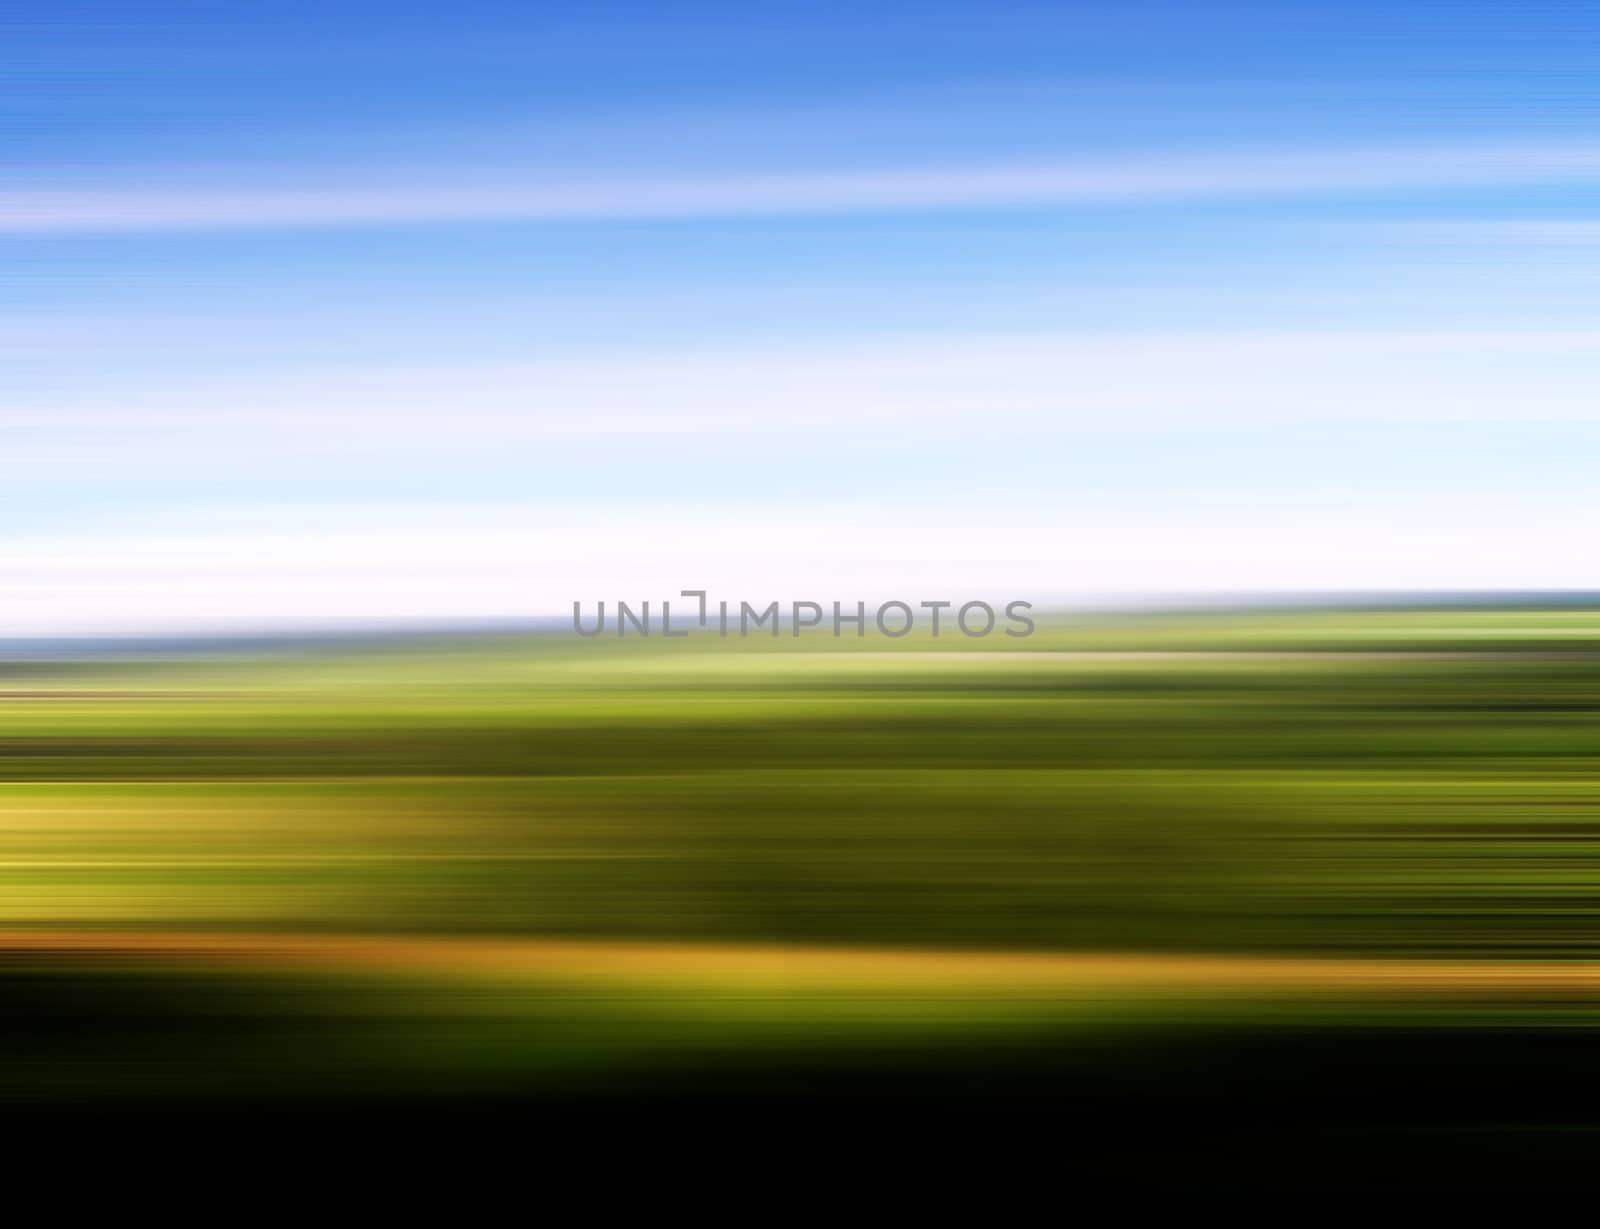 Abstract speed background - landscape with blue sky